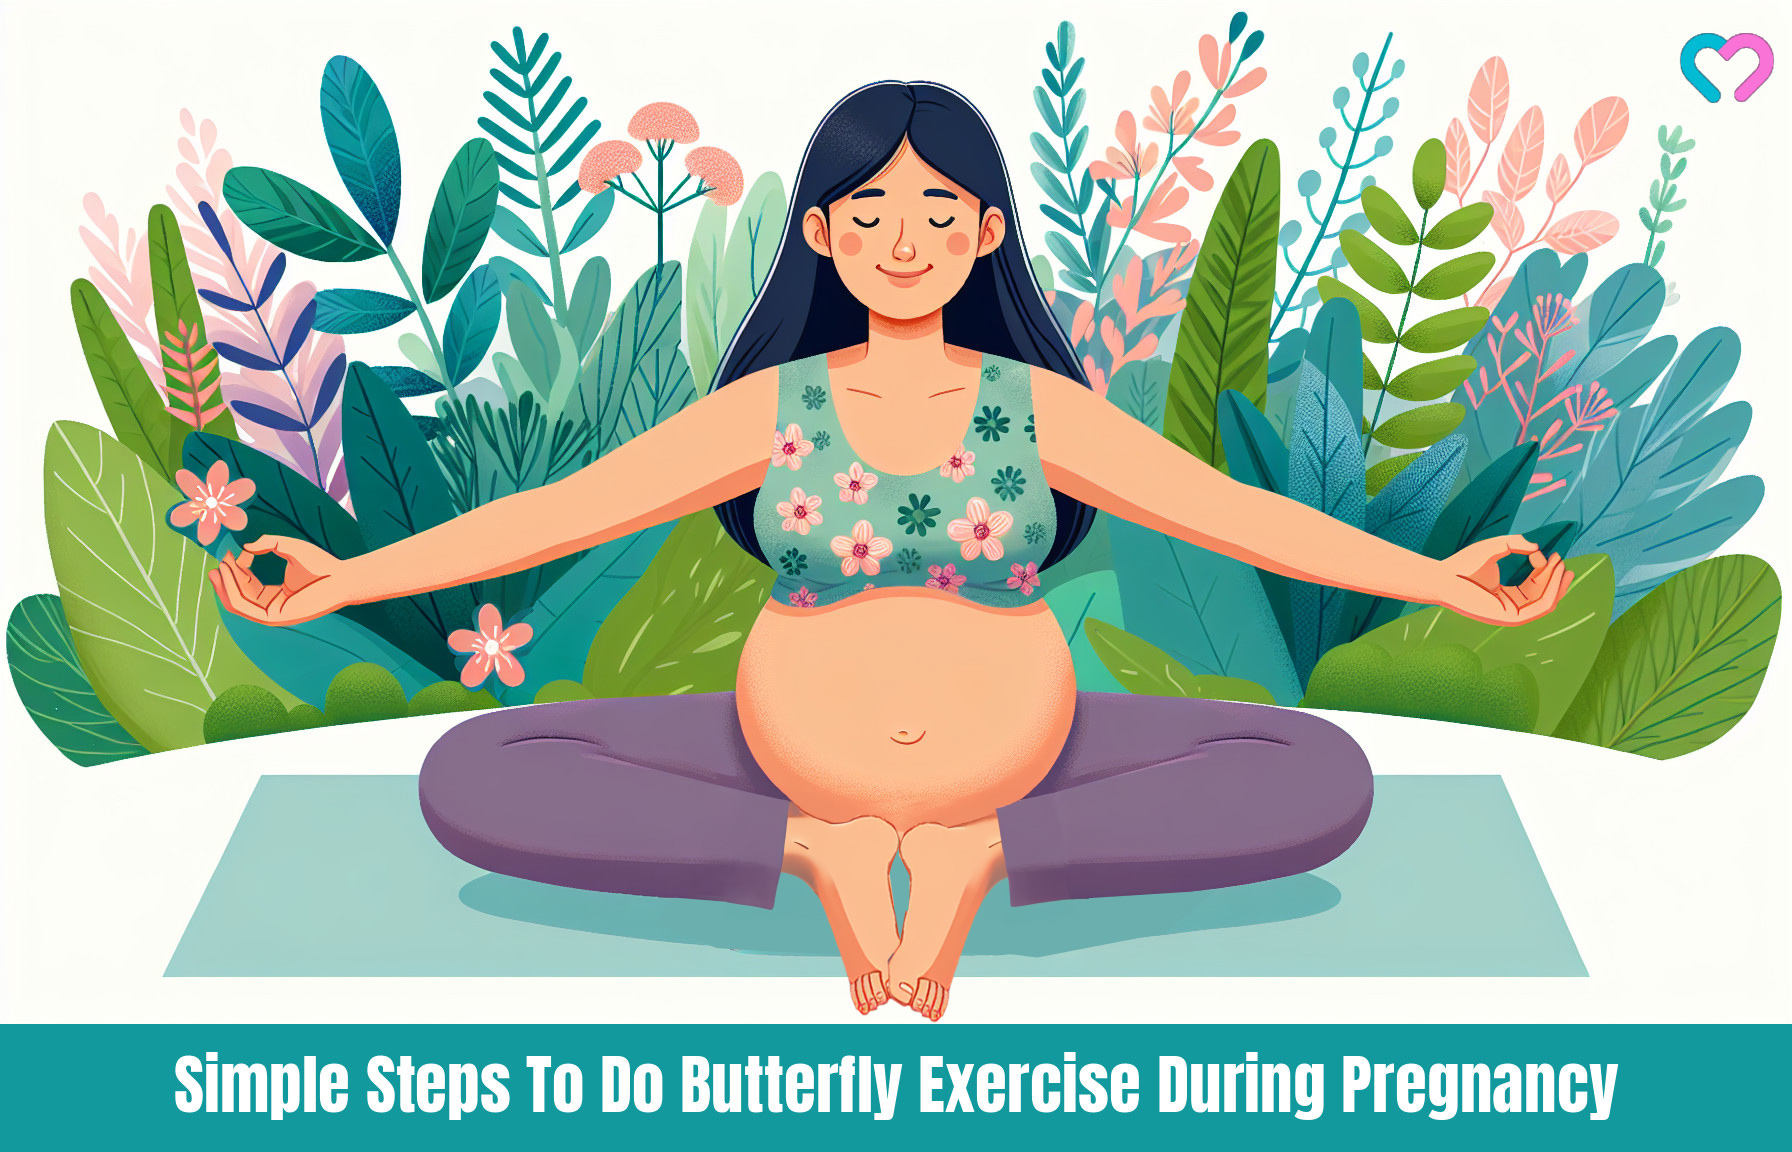 Butterfly Exercise During Pregnancy_illustration